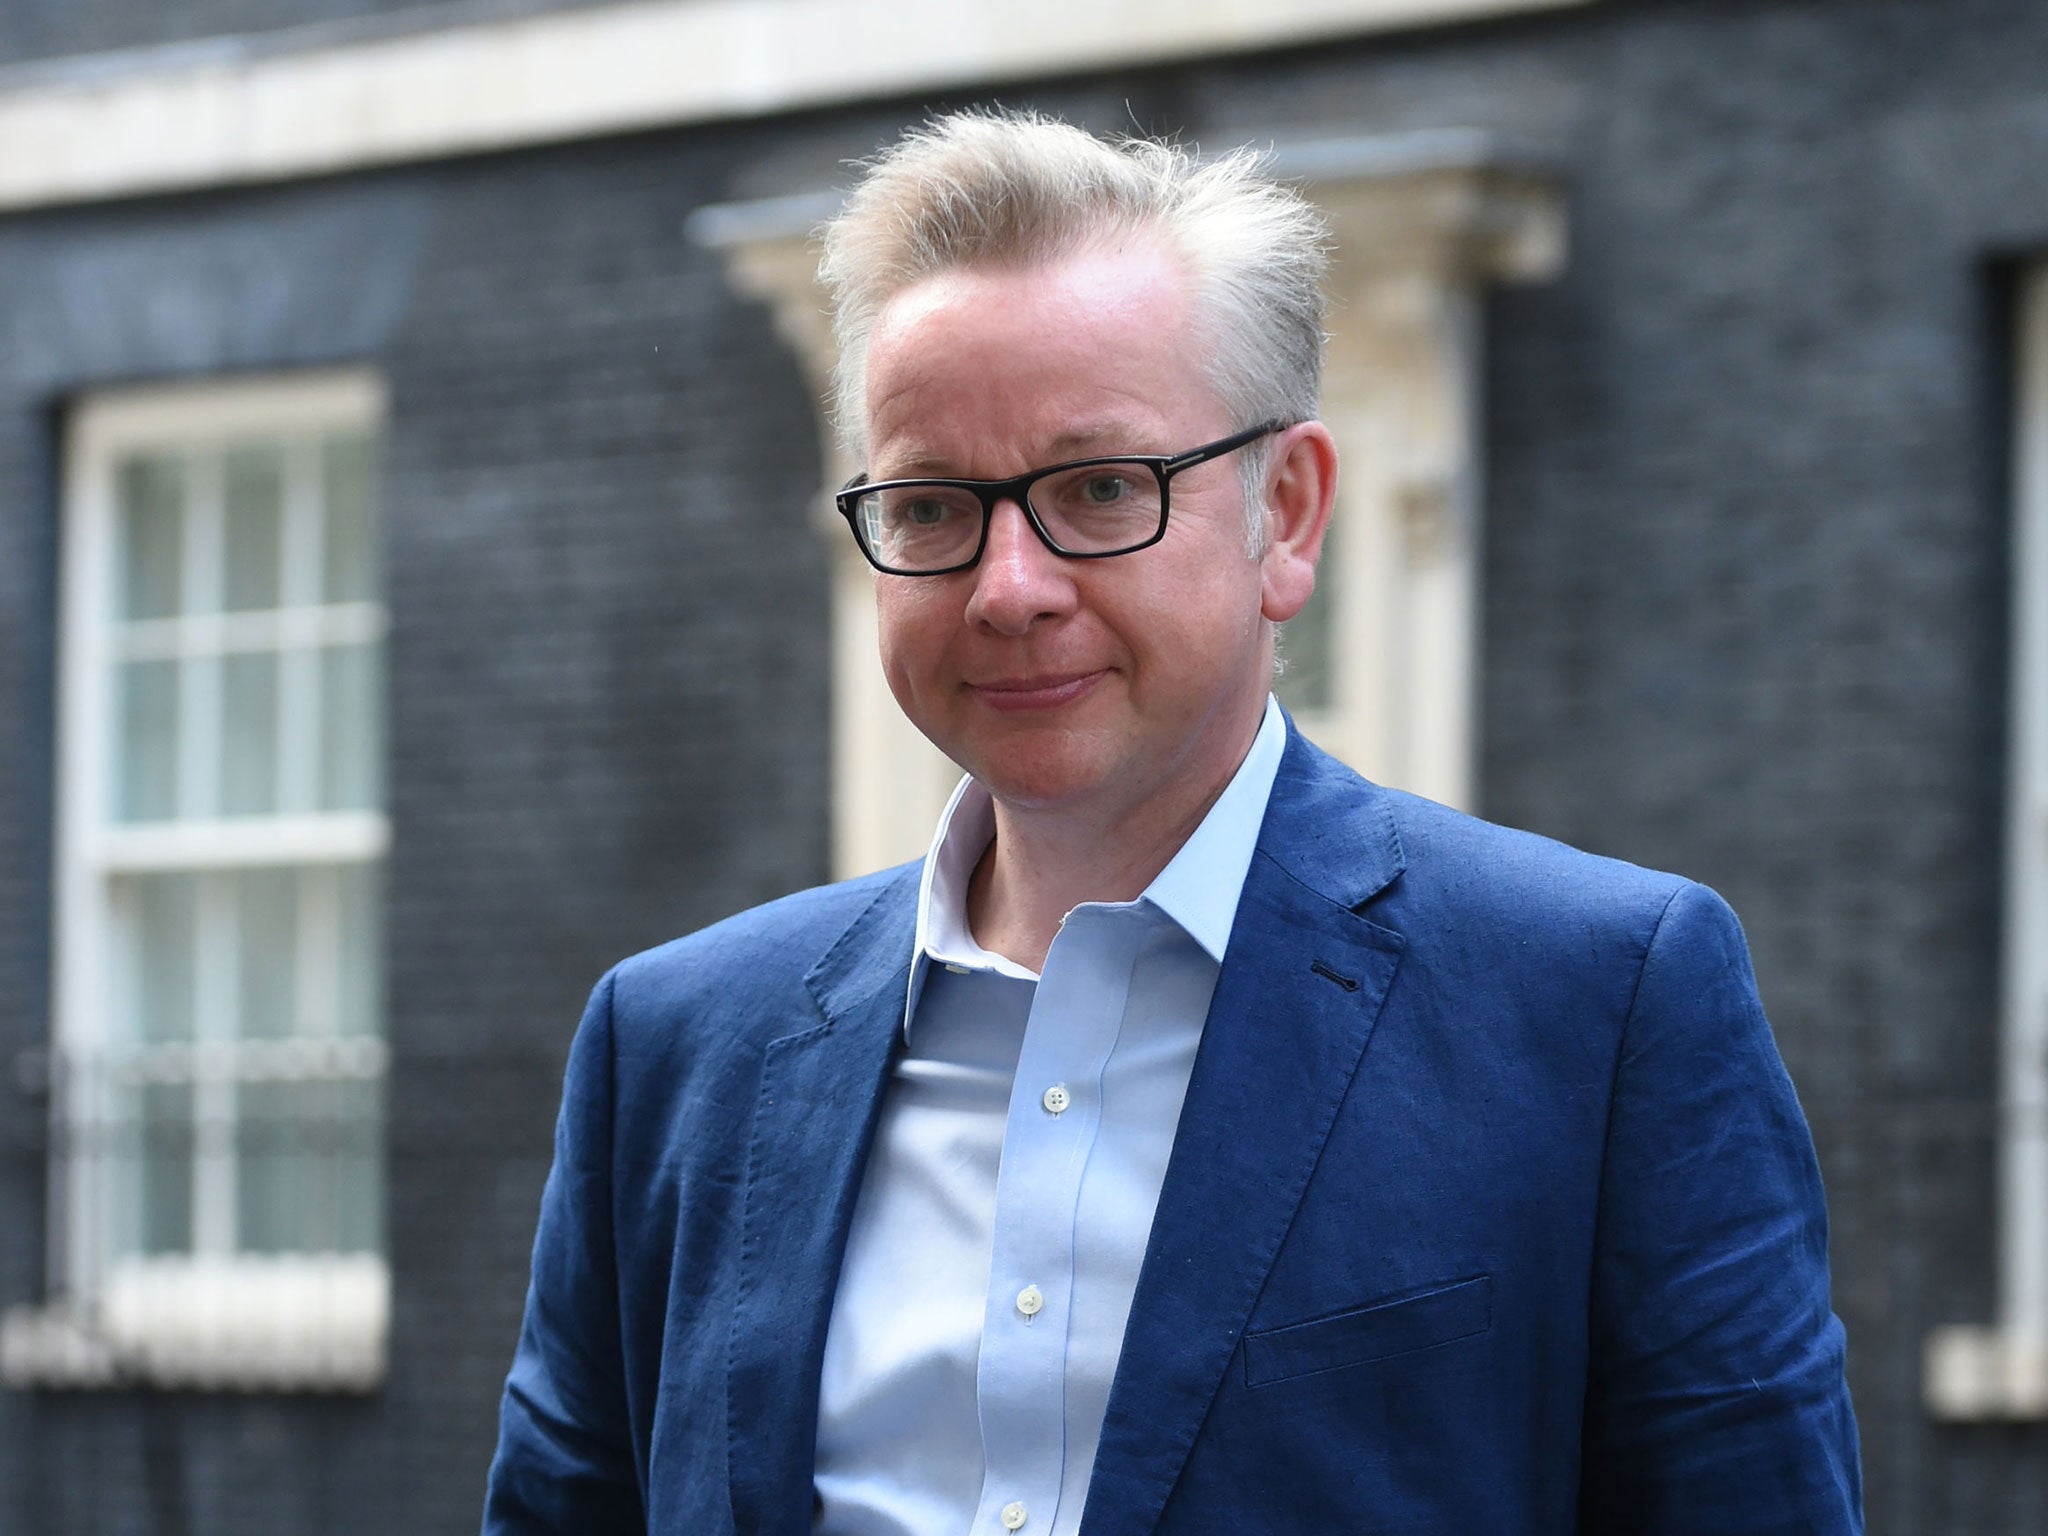 Michael Gove has overwhelmingly voted against efforts to protect the environment